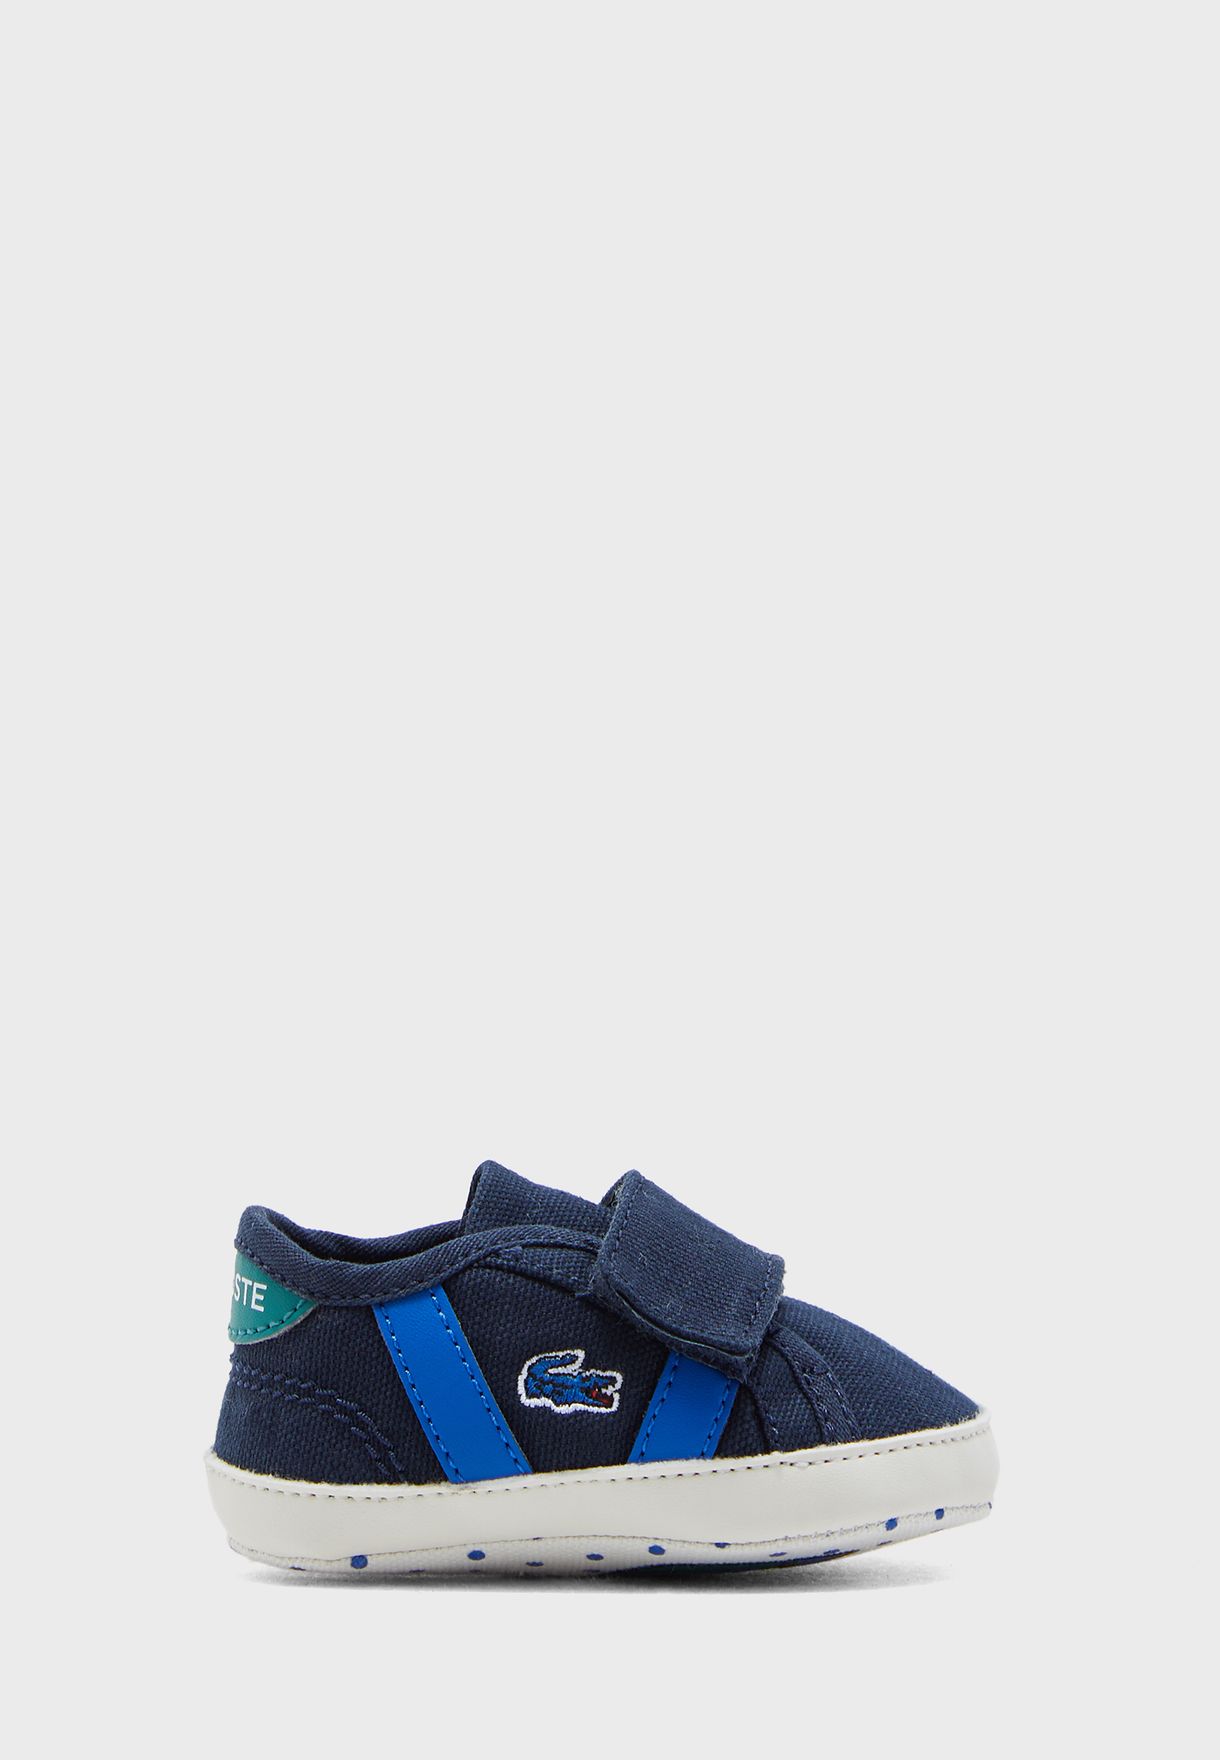 lacoste crib shoes